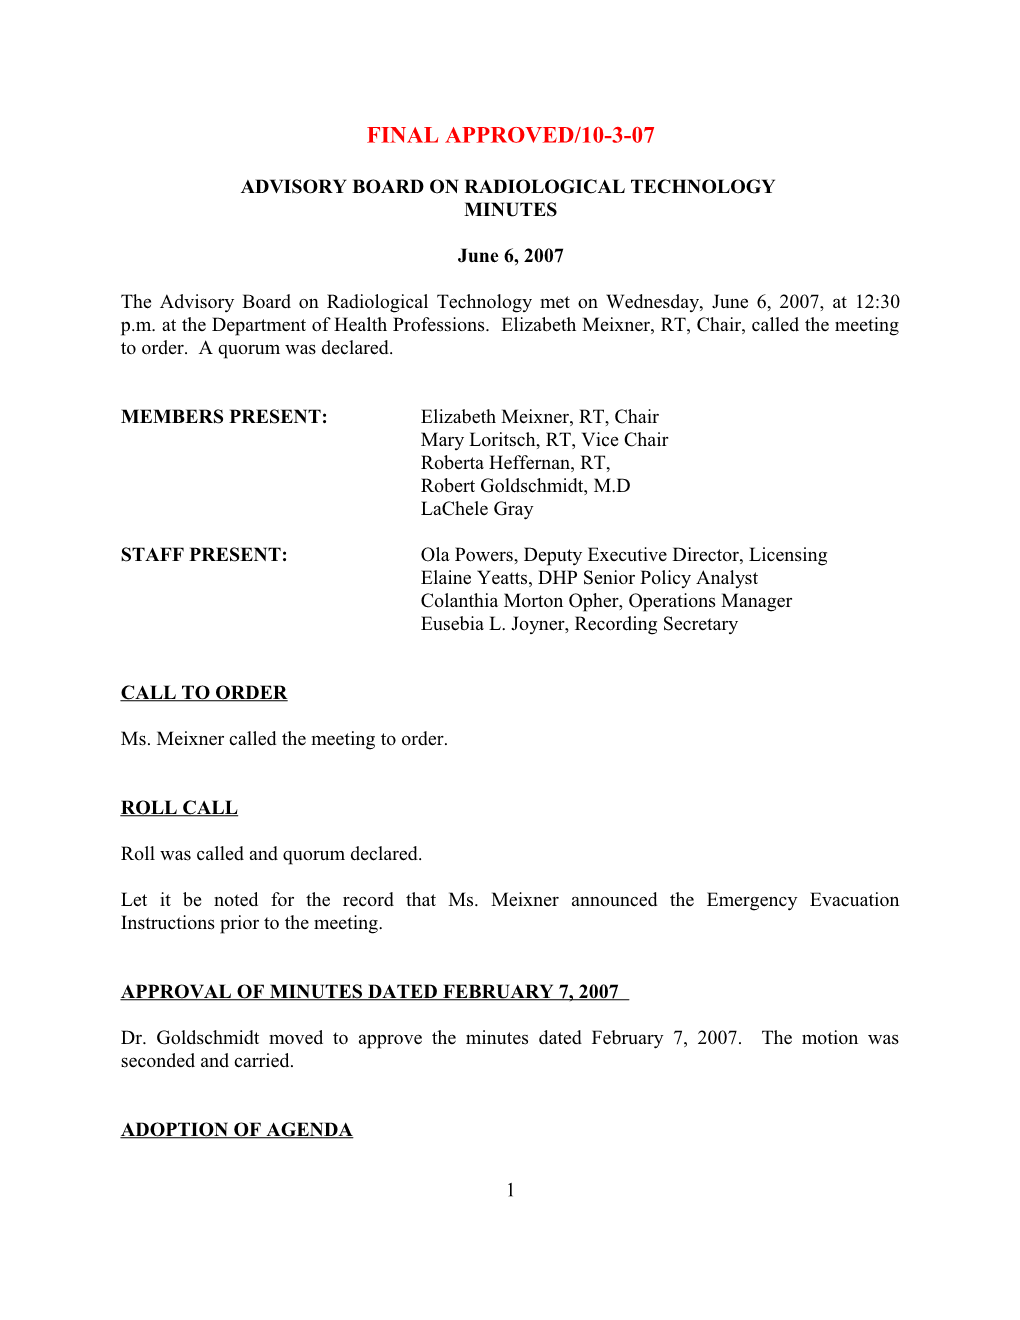 ADVISORY COMMITTEE on RADIOLOGIC TECHNOLOGIST PRACTITIONERS - Final Minutes - June 6, 2007